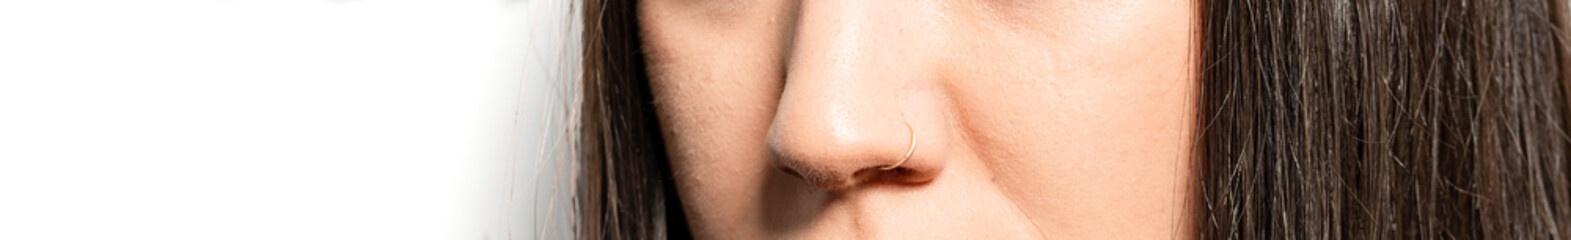 Close up of young woman with nose piercings